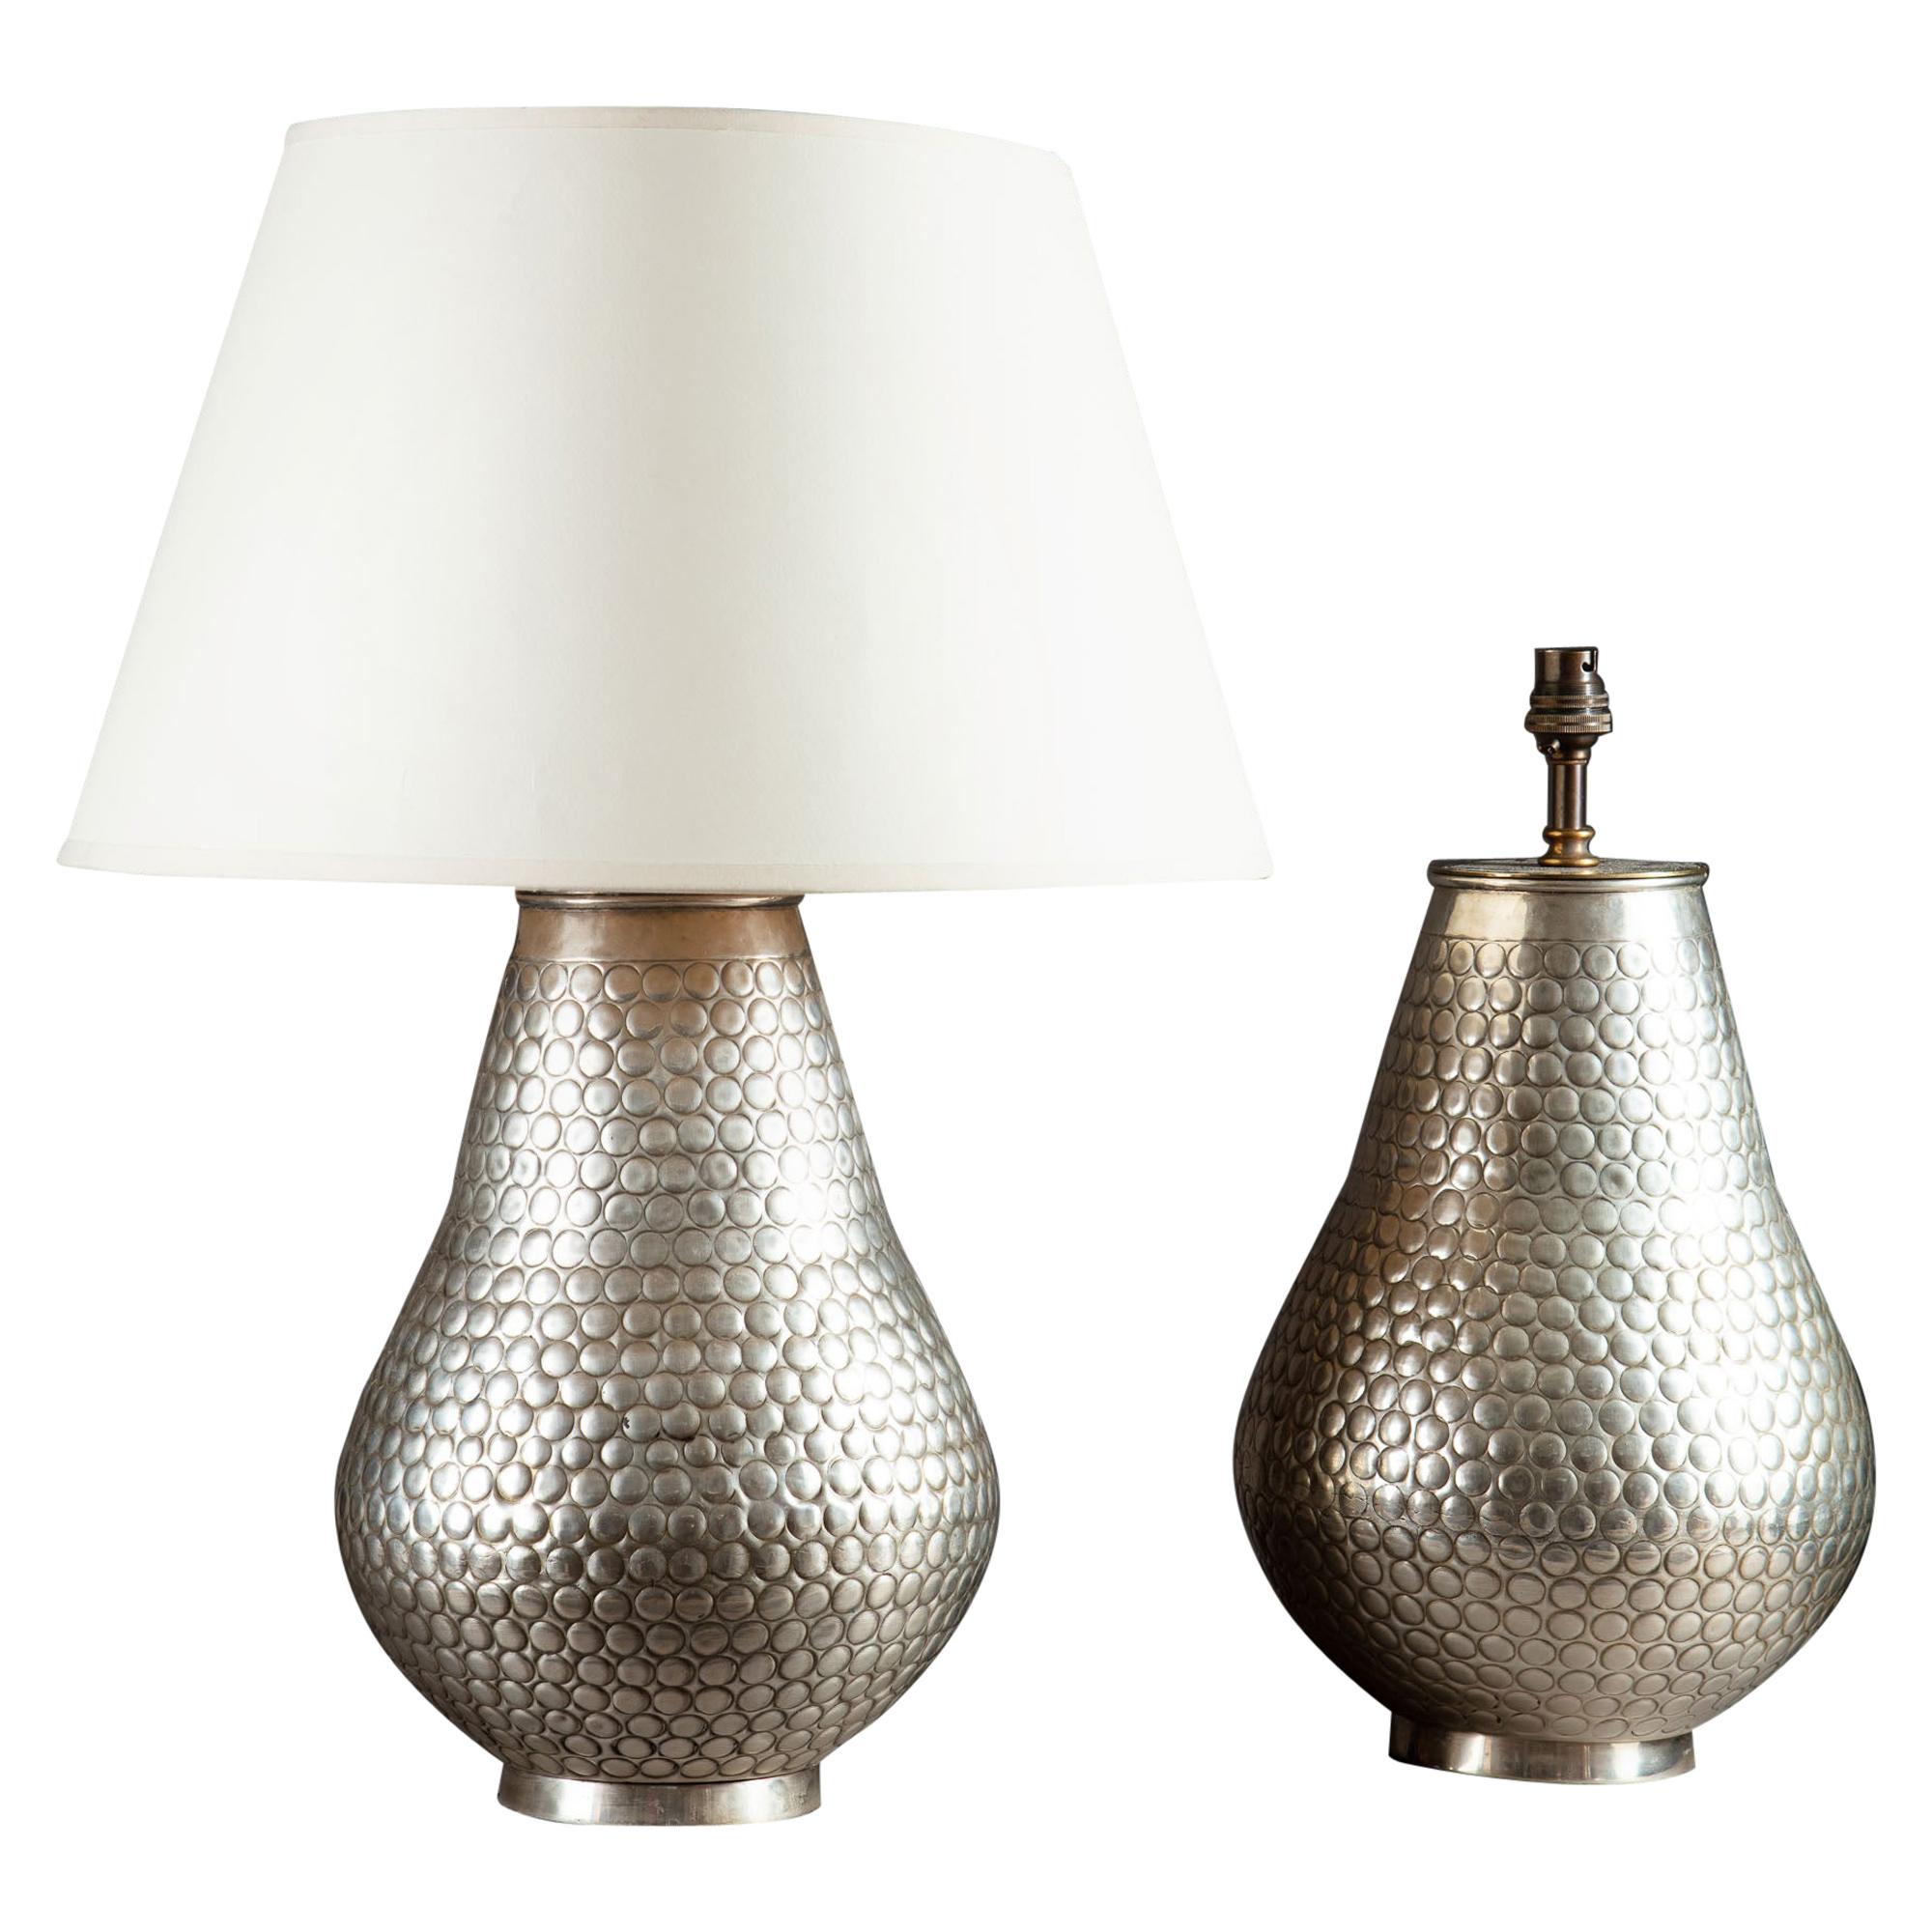 Pair of Silvered Punched Metal Vases as Table Lamps